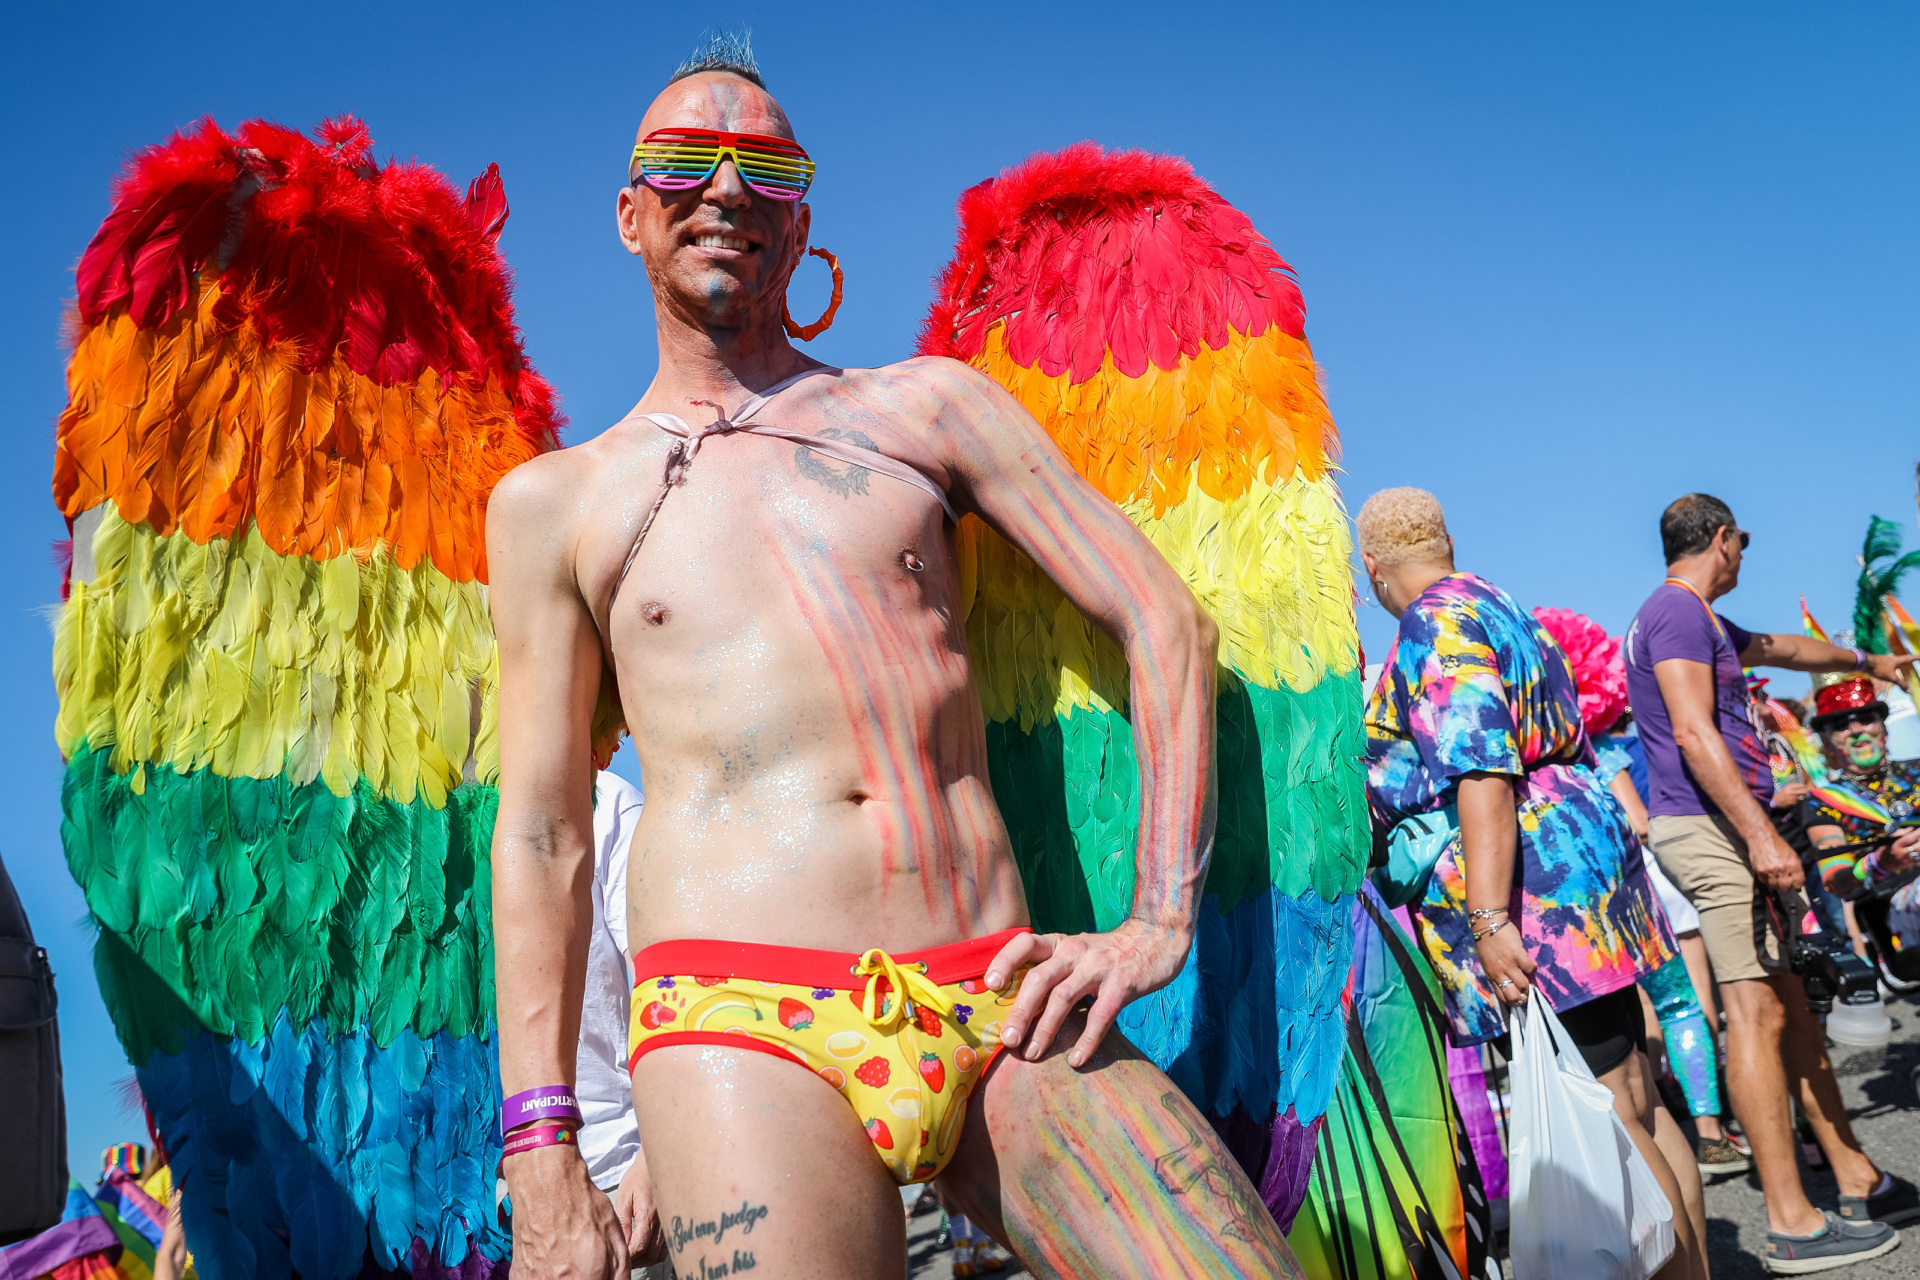 BRIGHTON, ENGLAND - AUGUST 06: A festival goer poses at the Pride LGBTQ+ Community Parade – ‘Love, Protest & Unity’ during the Brighton Pride on August 06, 2022 in Brighton, England. (Photo by Tristan Fewings/Getty Images)